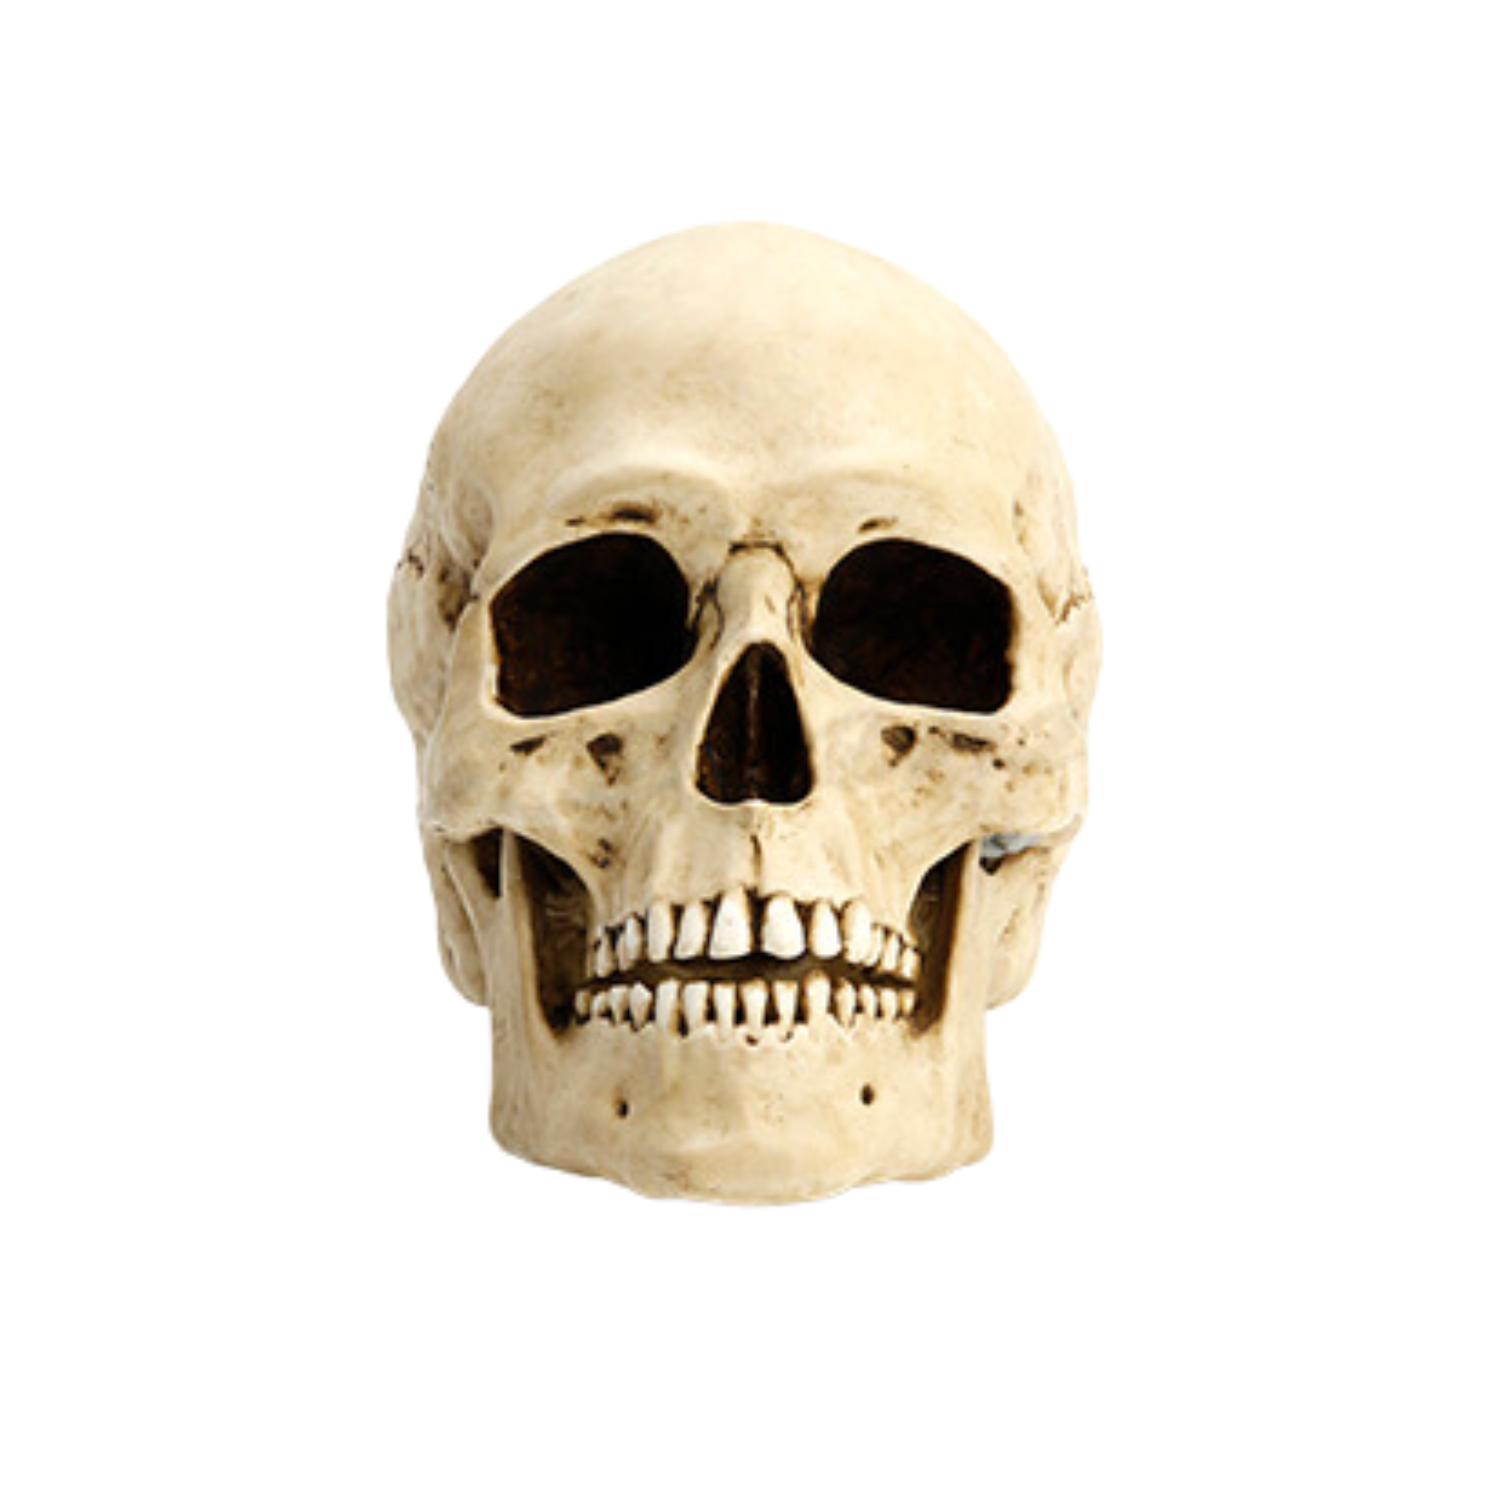 Replica Human Skull with Jaw Motion